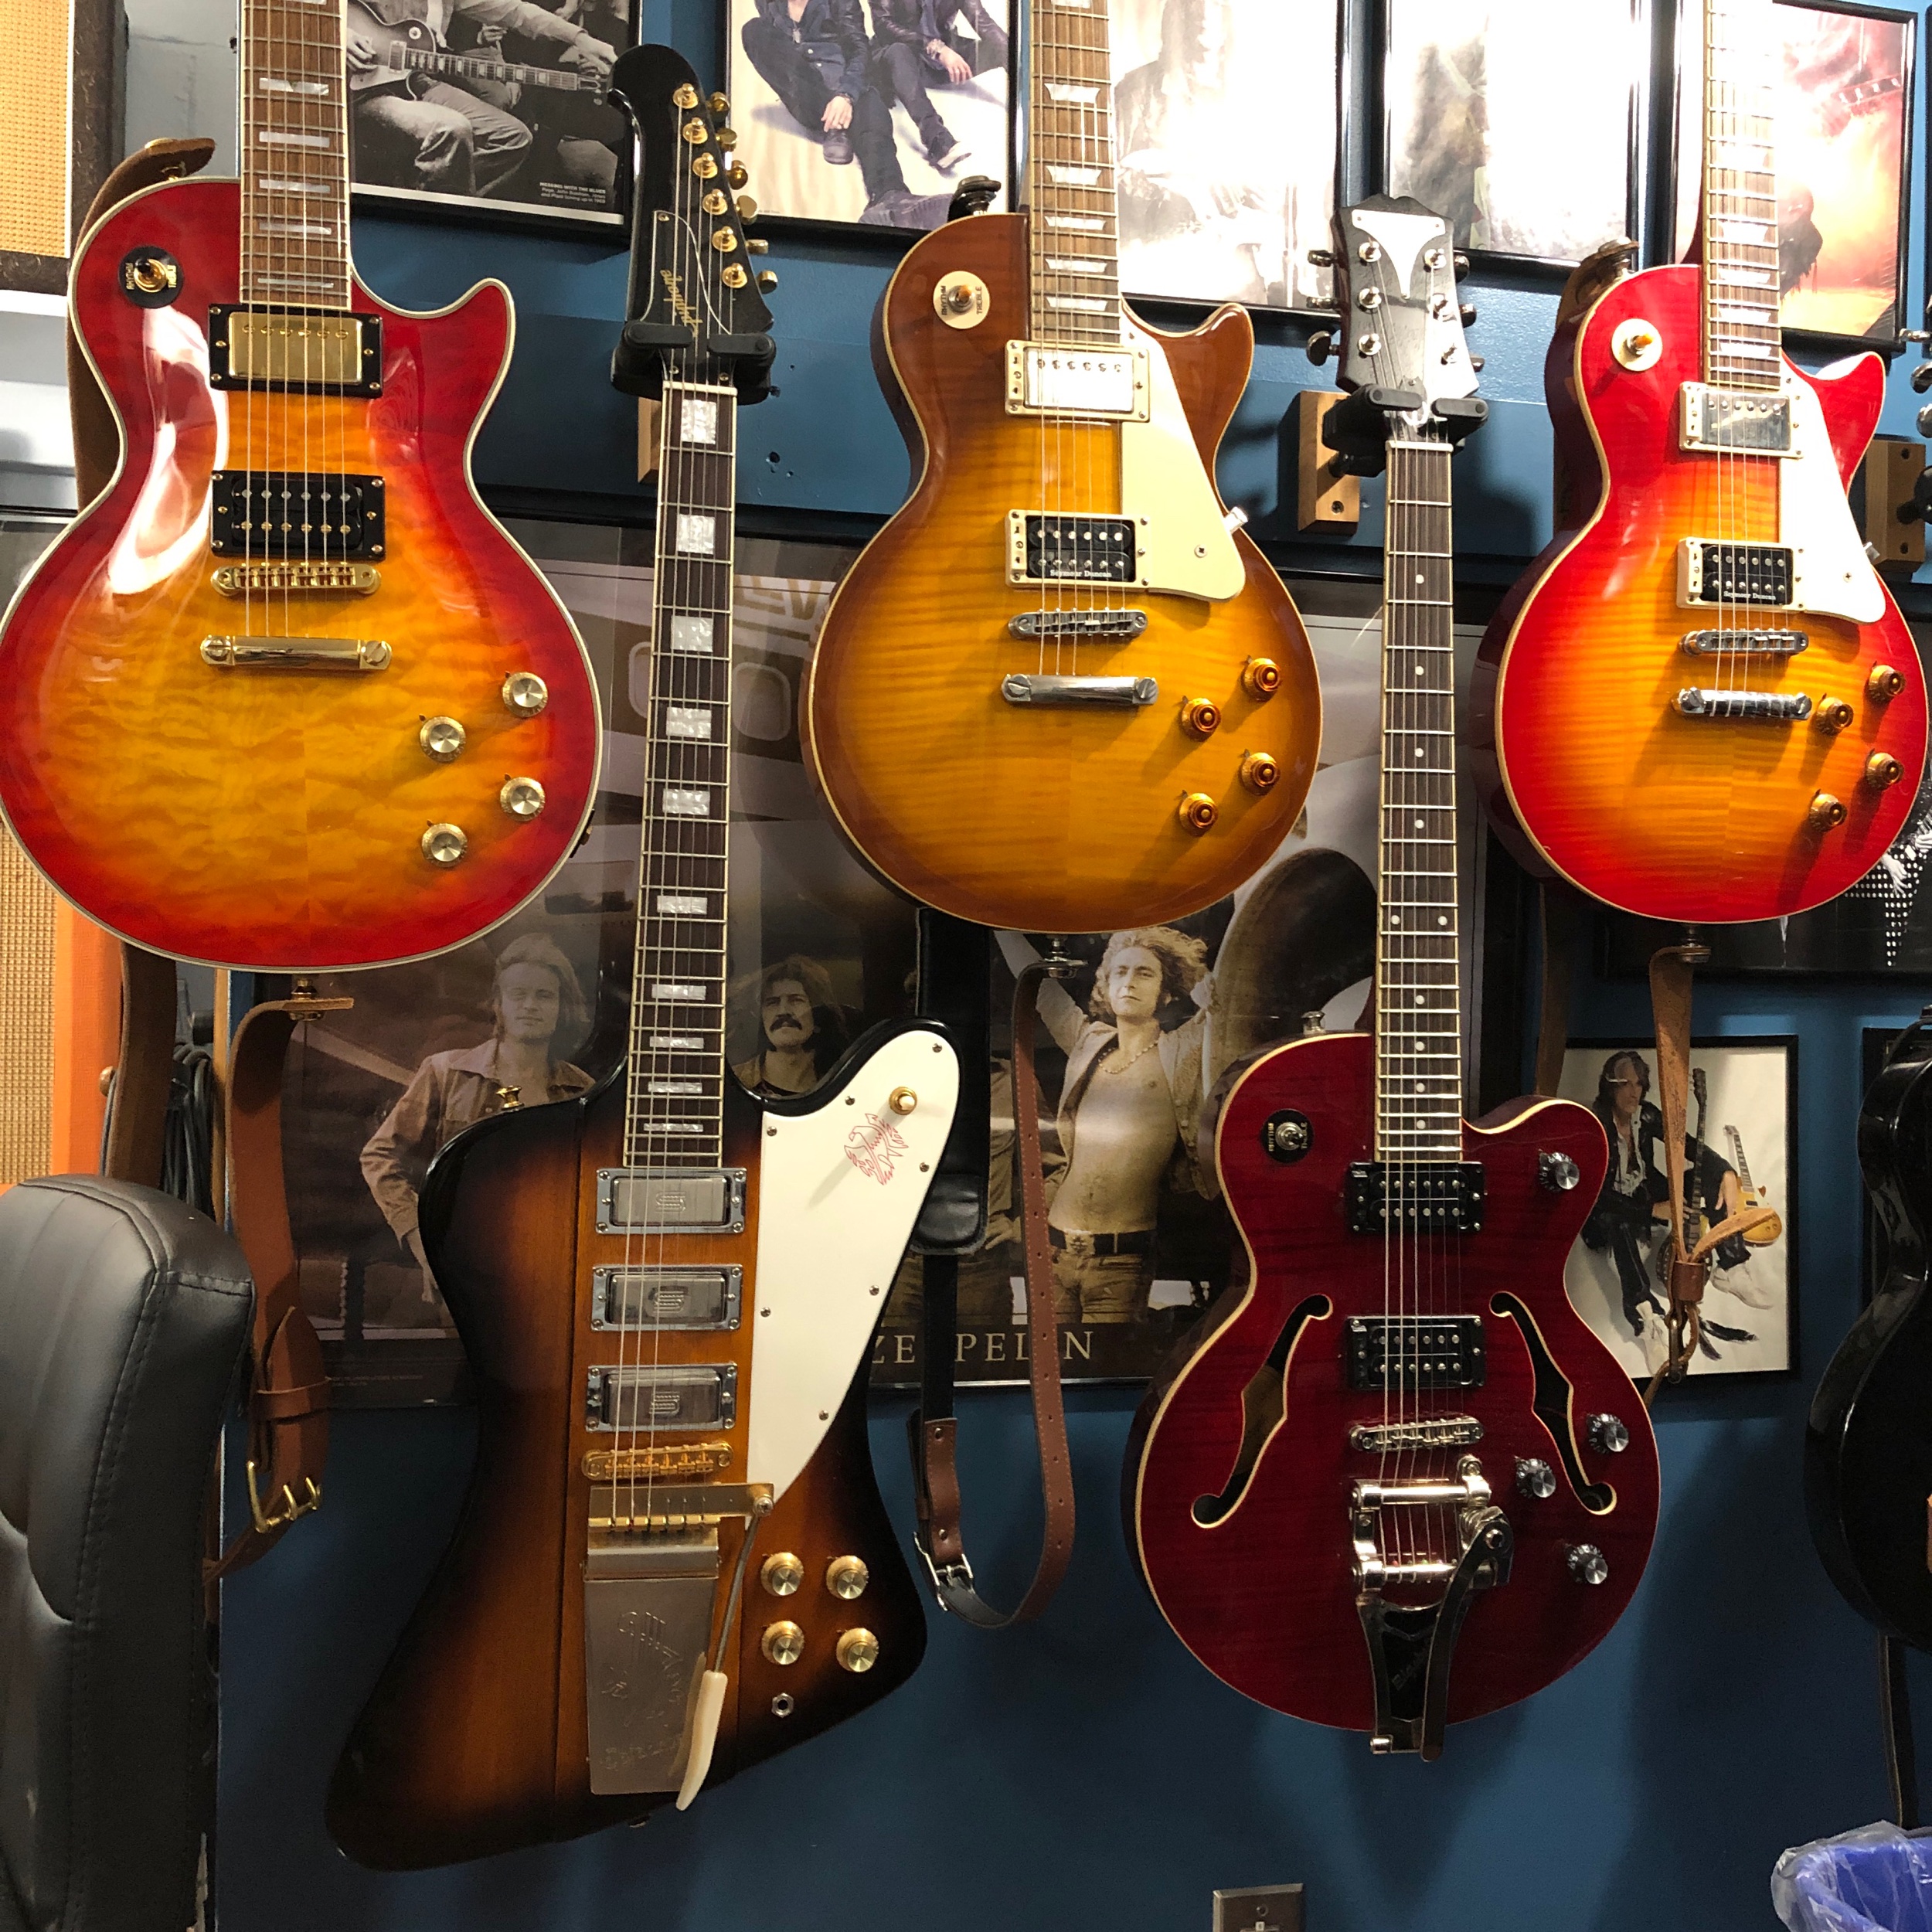  Chris has customized and upgraded all of the guitars for excellent playability and tone. 